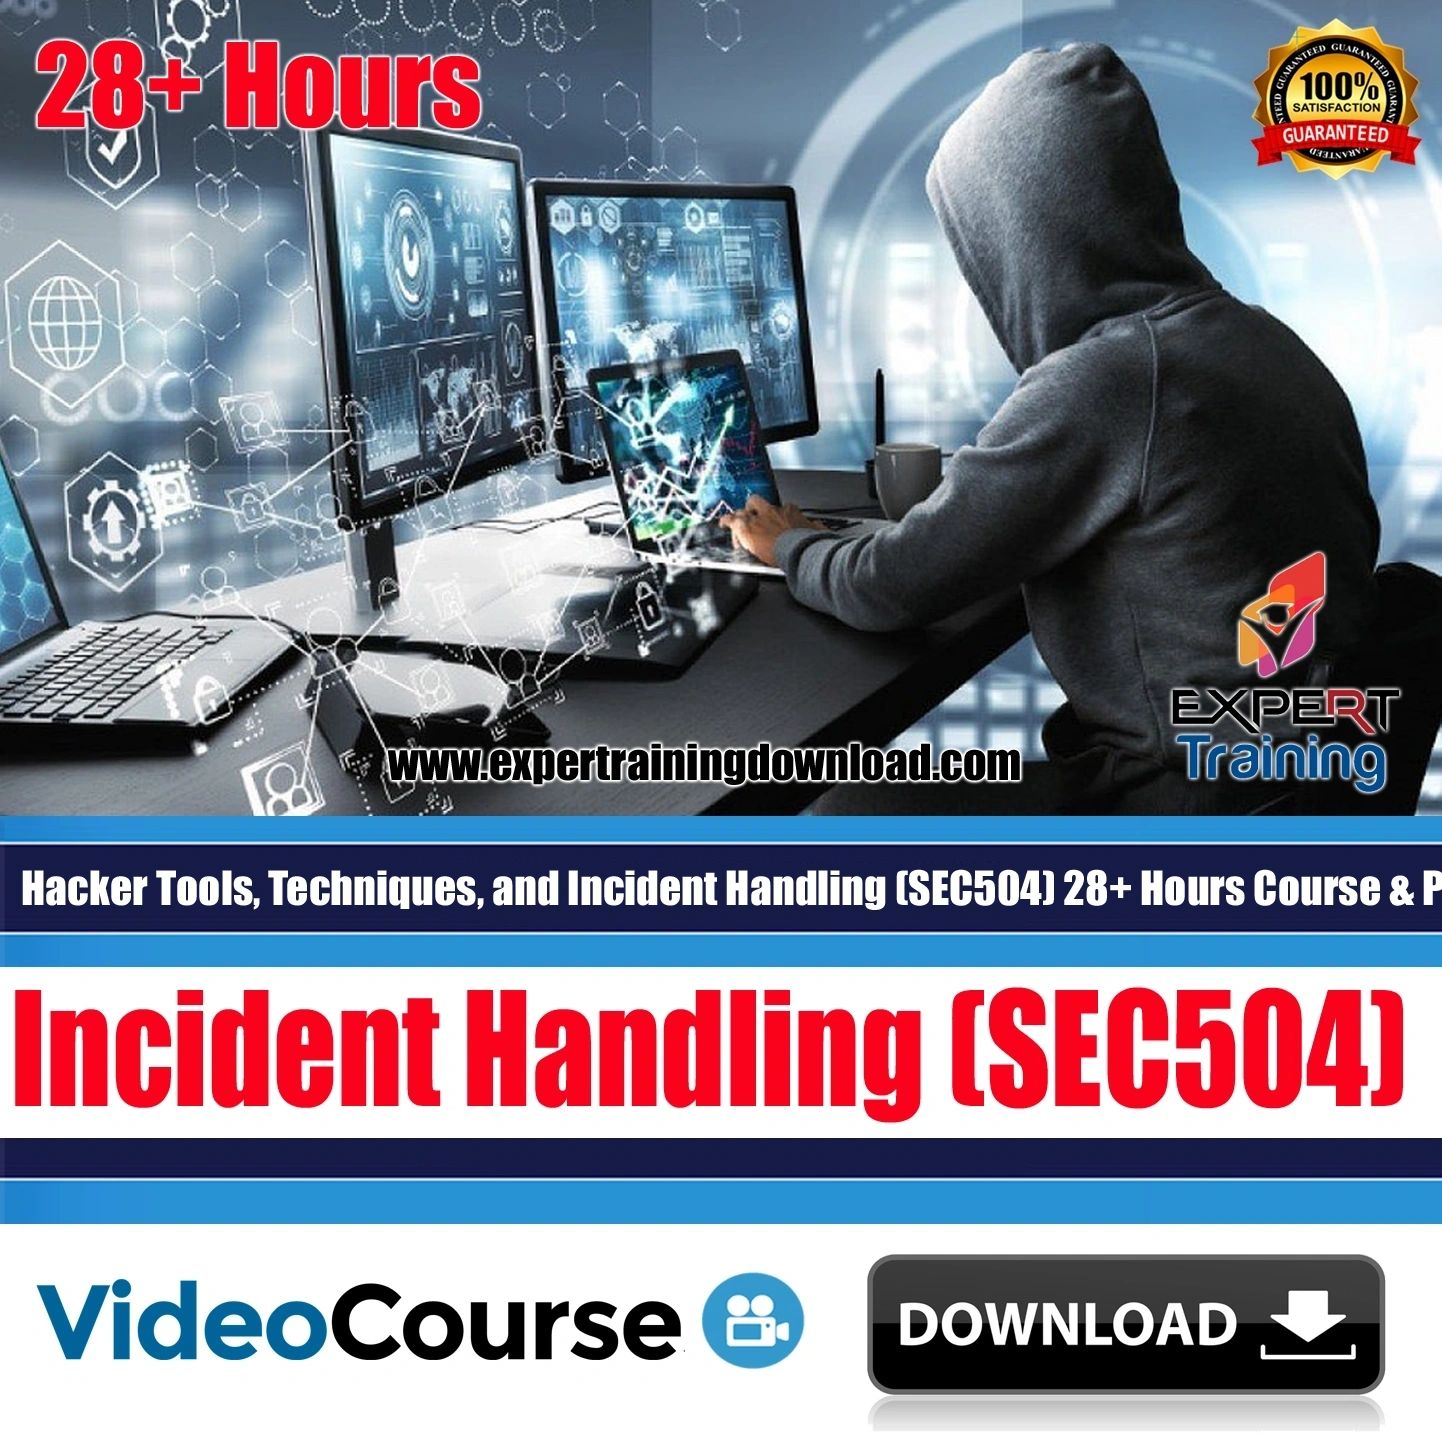 Hacker Tools, Techniques, and Incident Handling (SEC504) 28+ Hours Course & PDF Guides